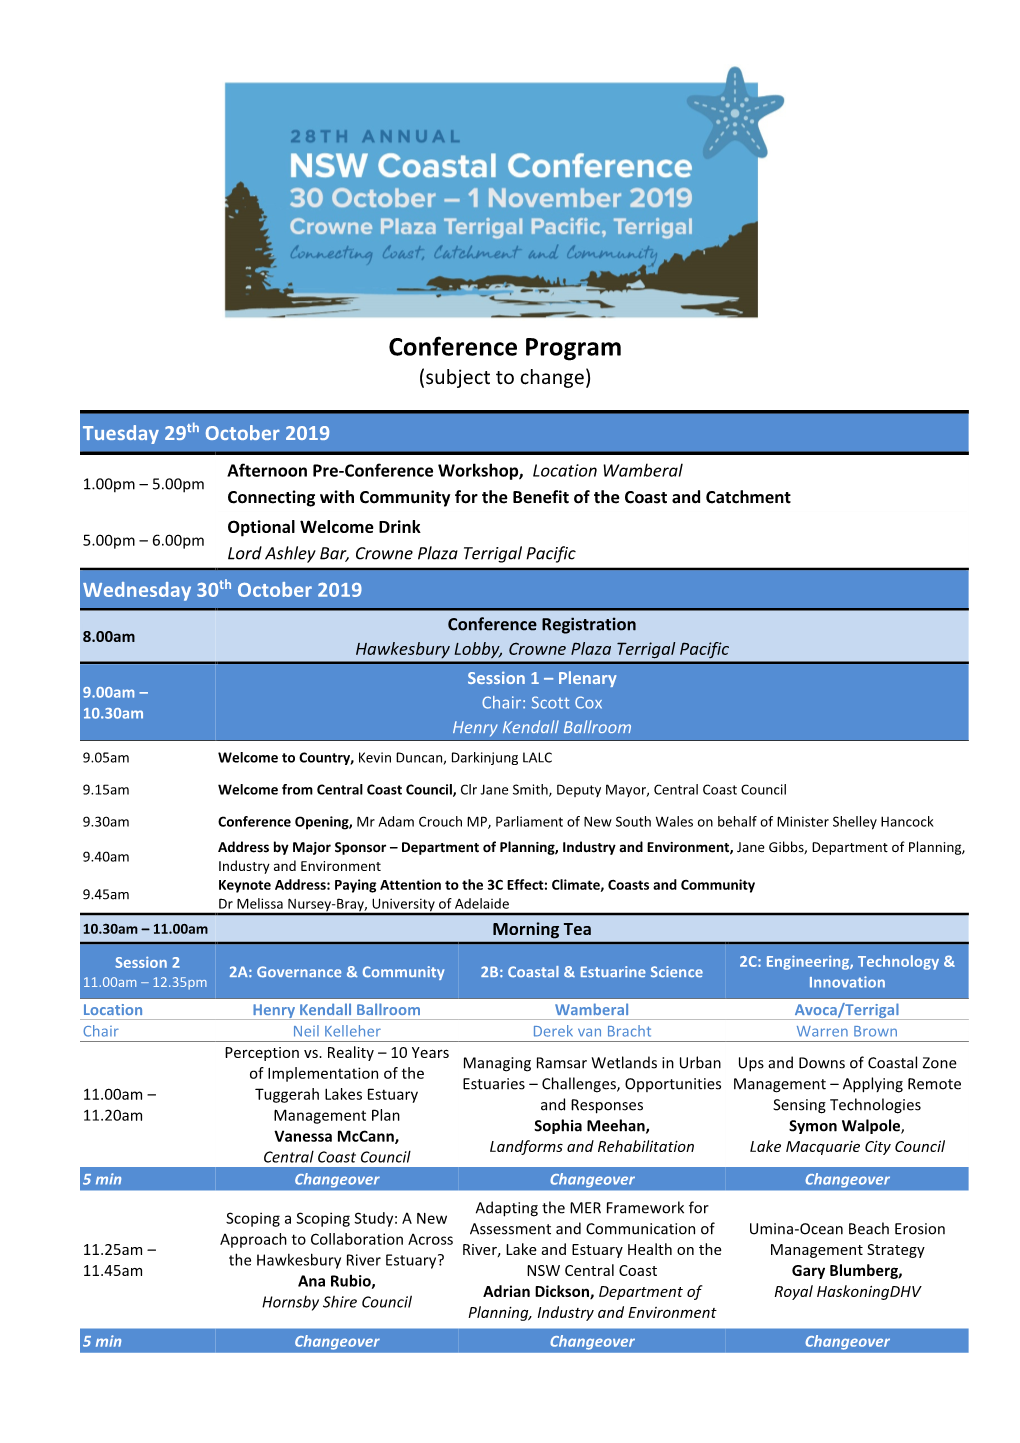 Conference Program (Subject to Change)